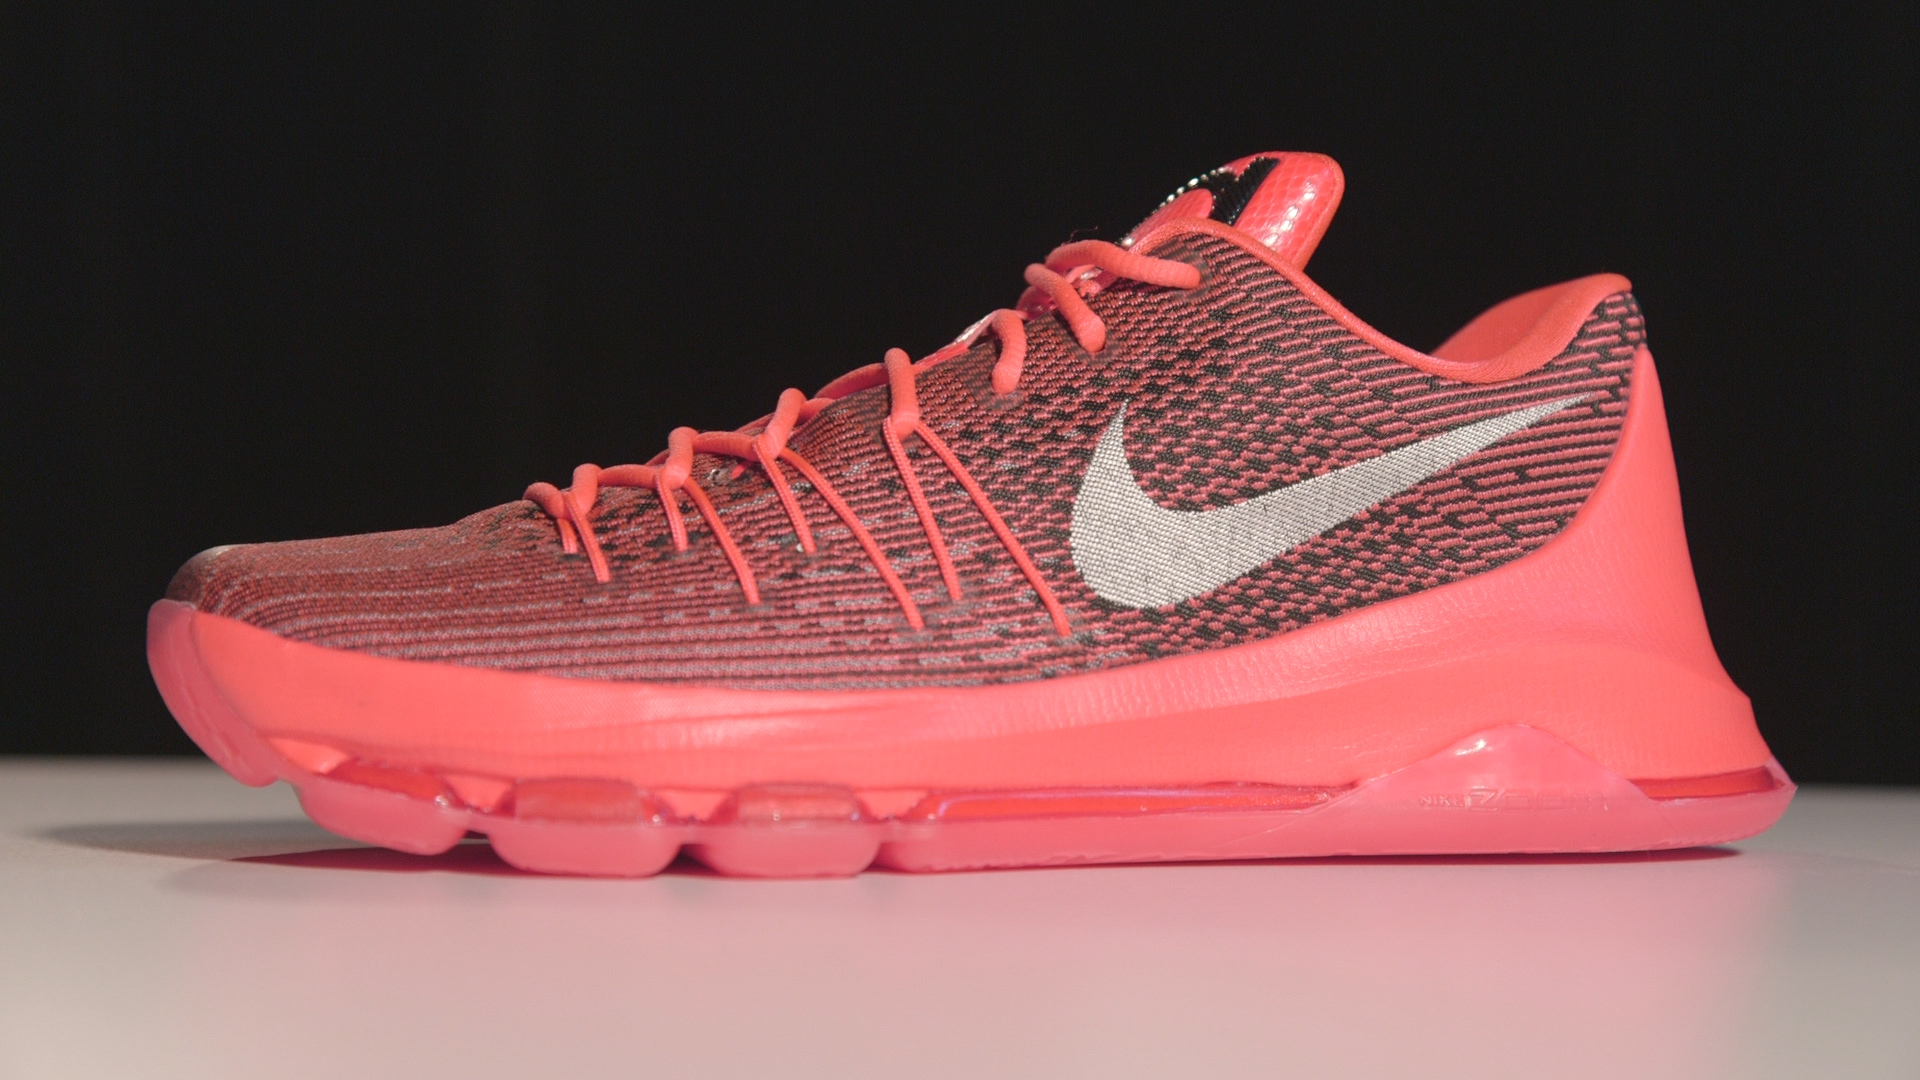 kd 8 red